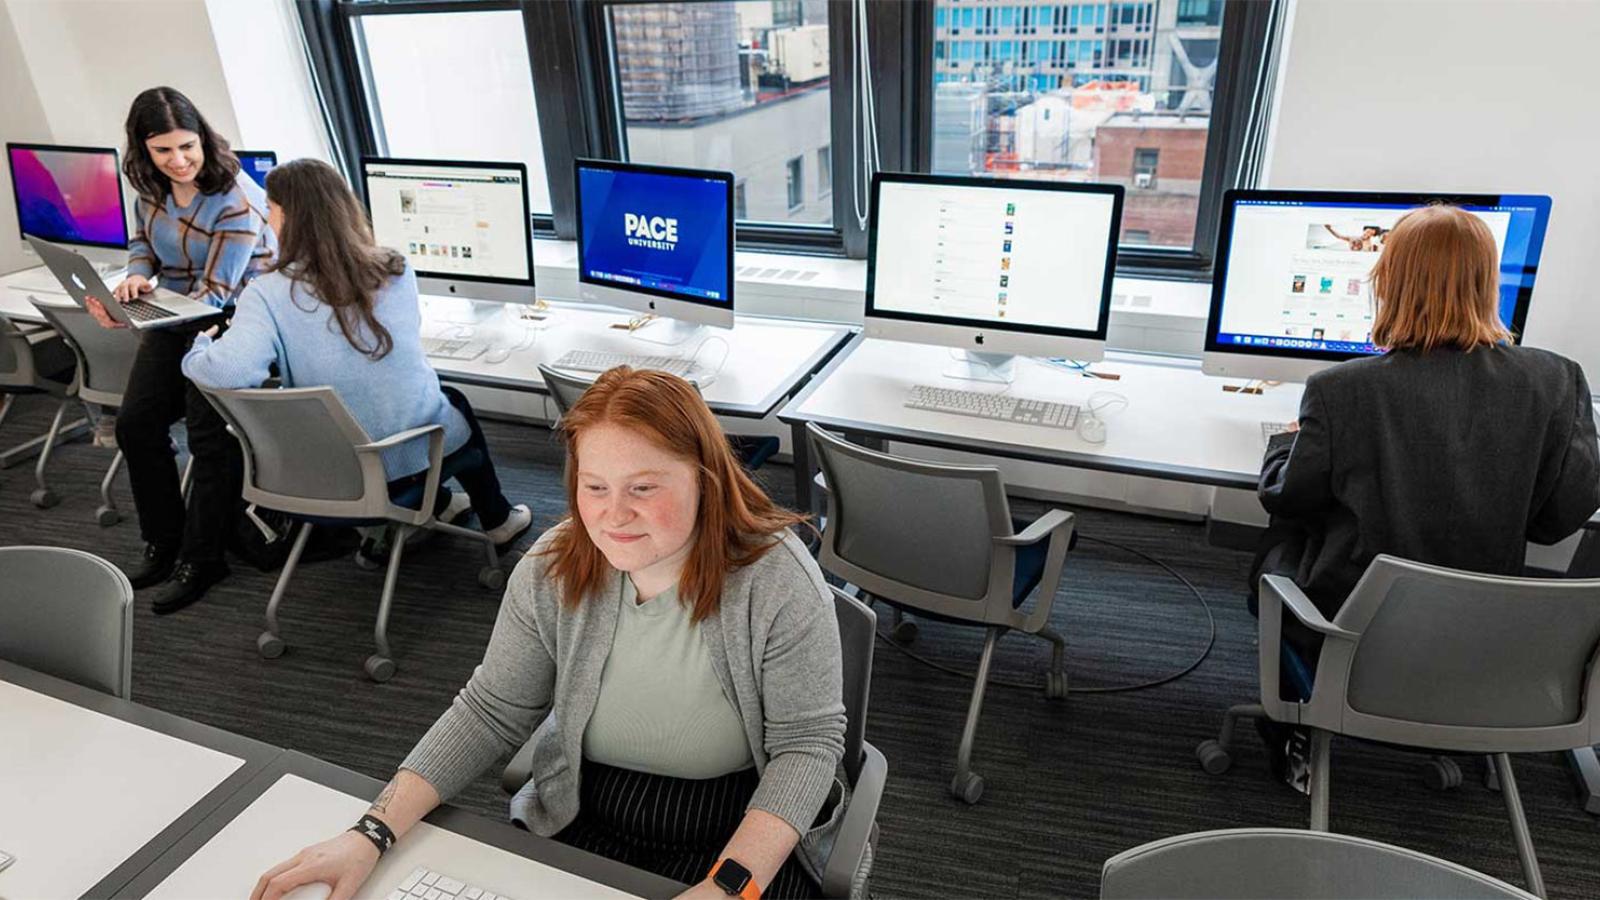 Students working in a computer lab. Outside the window is New York City.